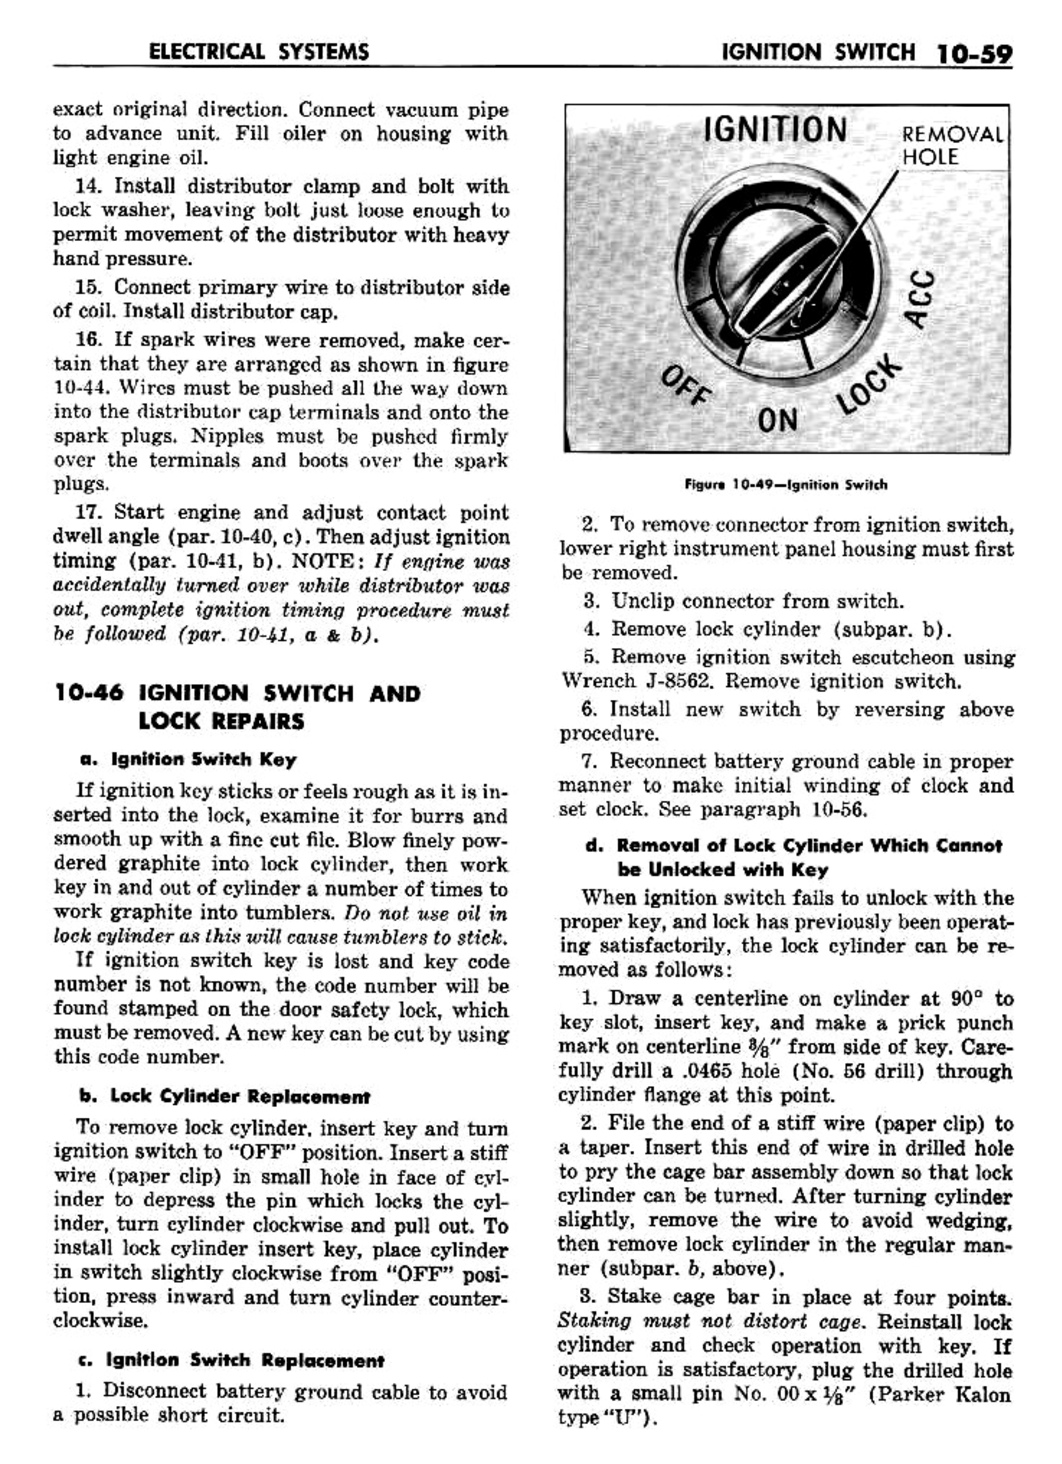 n_11 1960 Buick Shop Manual - Electrical Systems-059-059.jpg